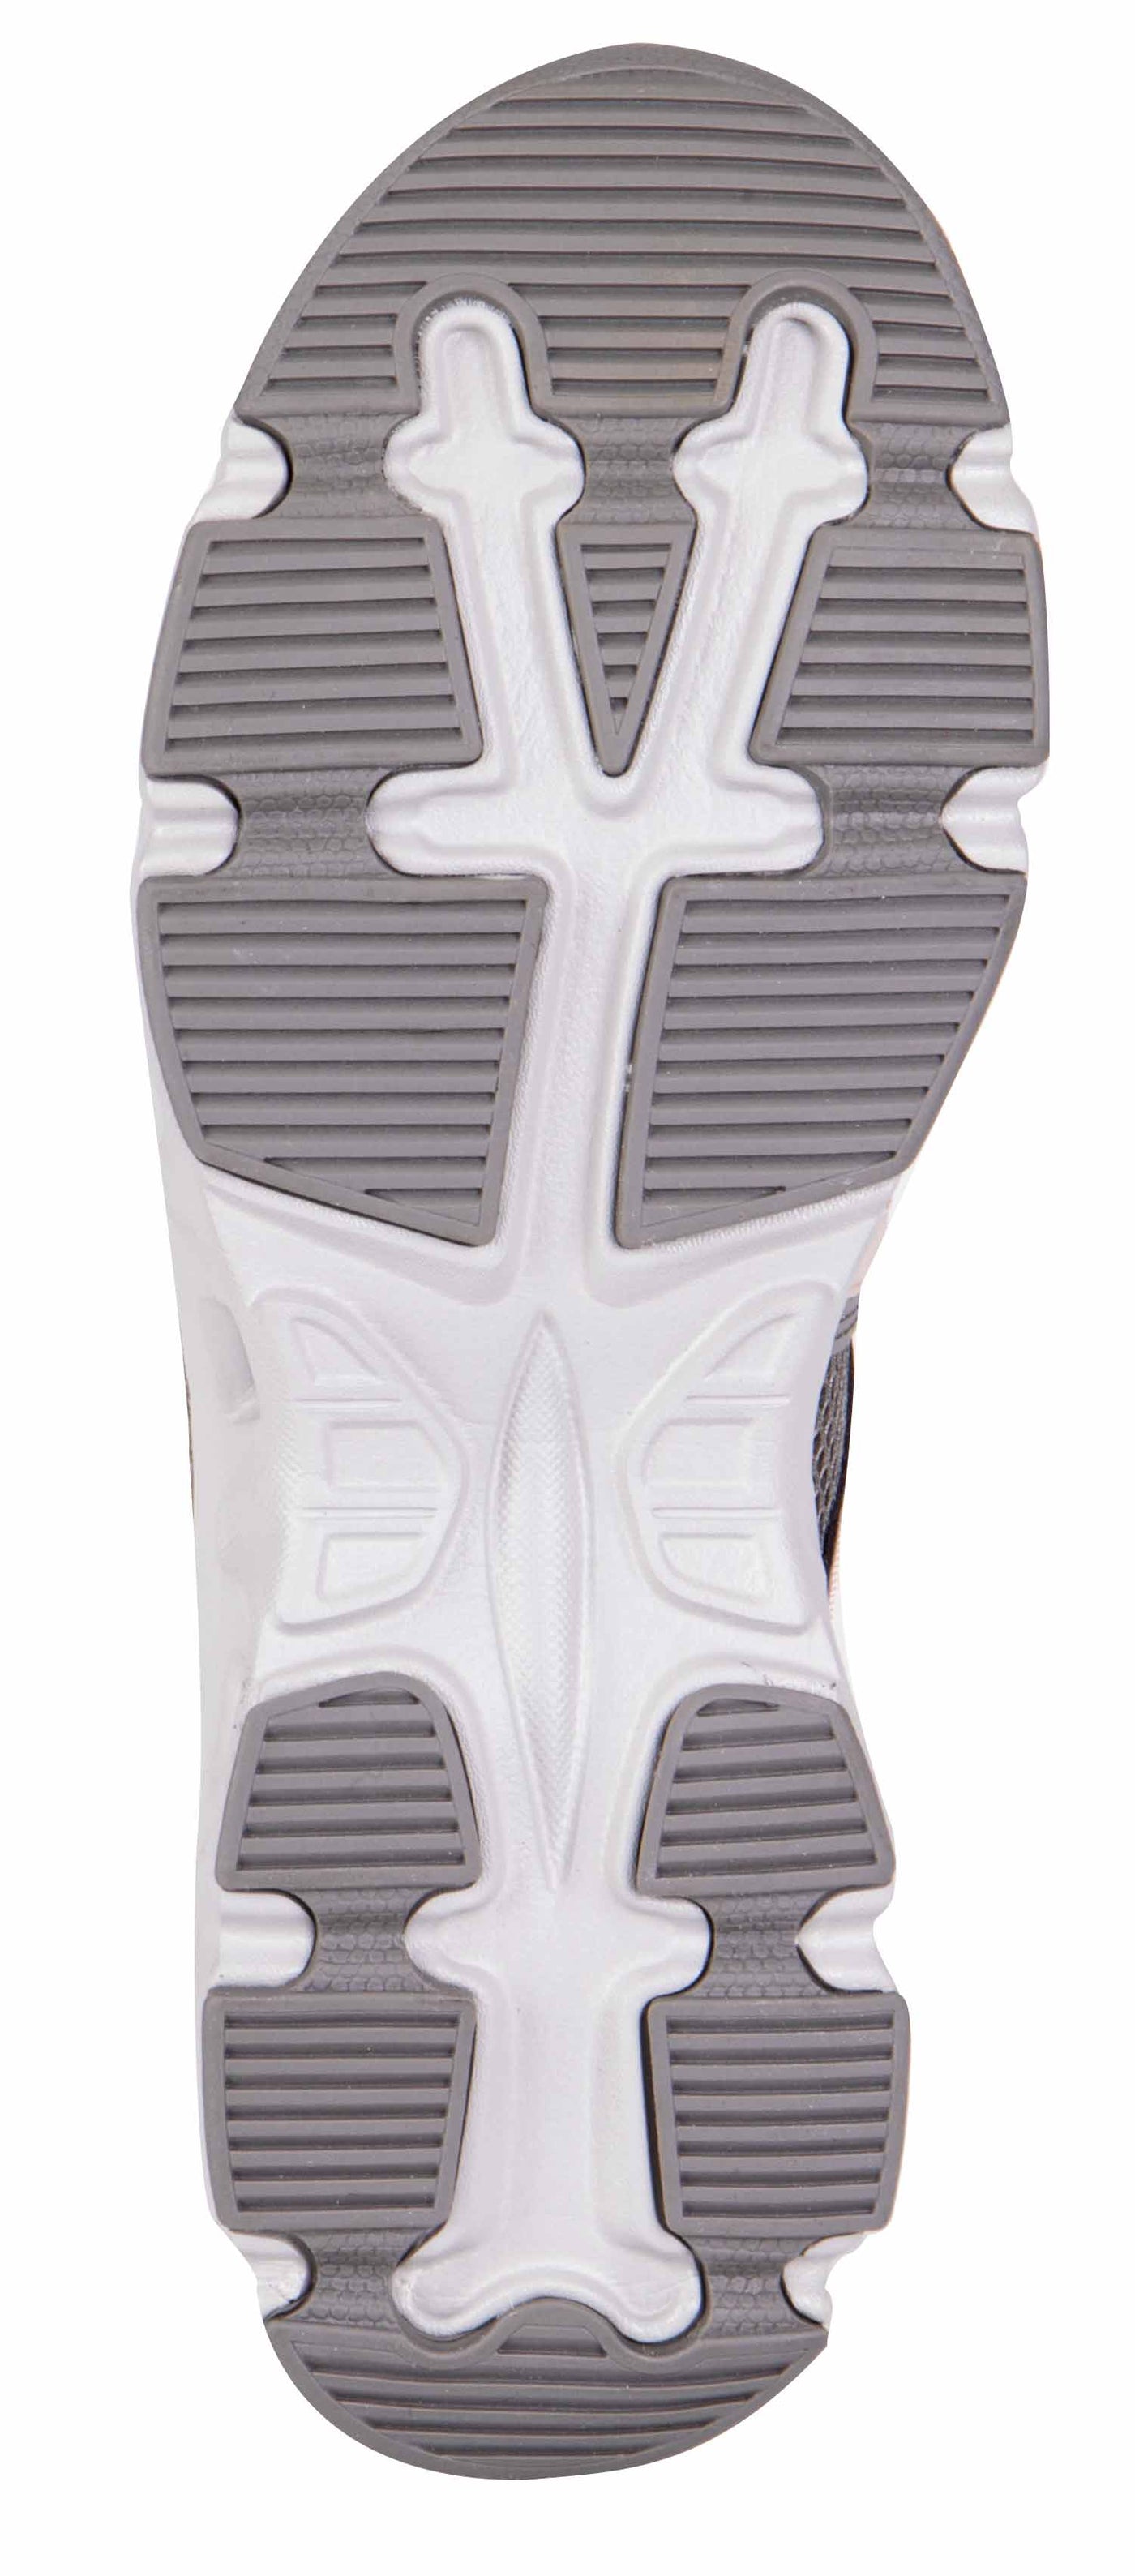 "Oceanic" women's fishing shoes with drainage system, gray